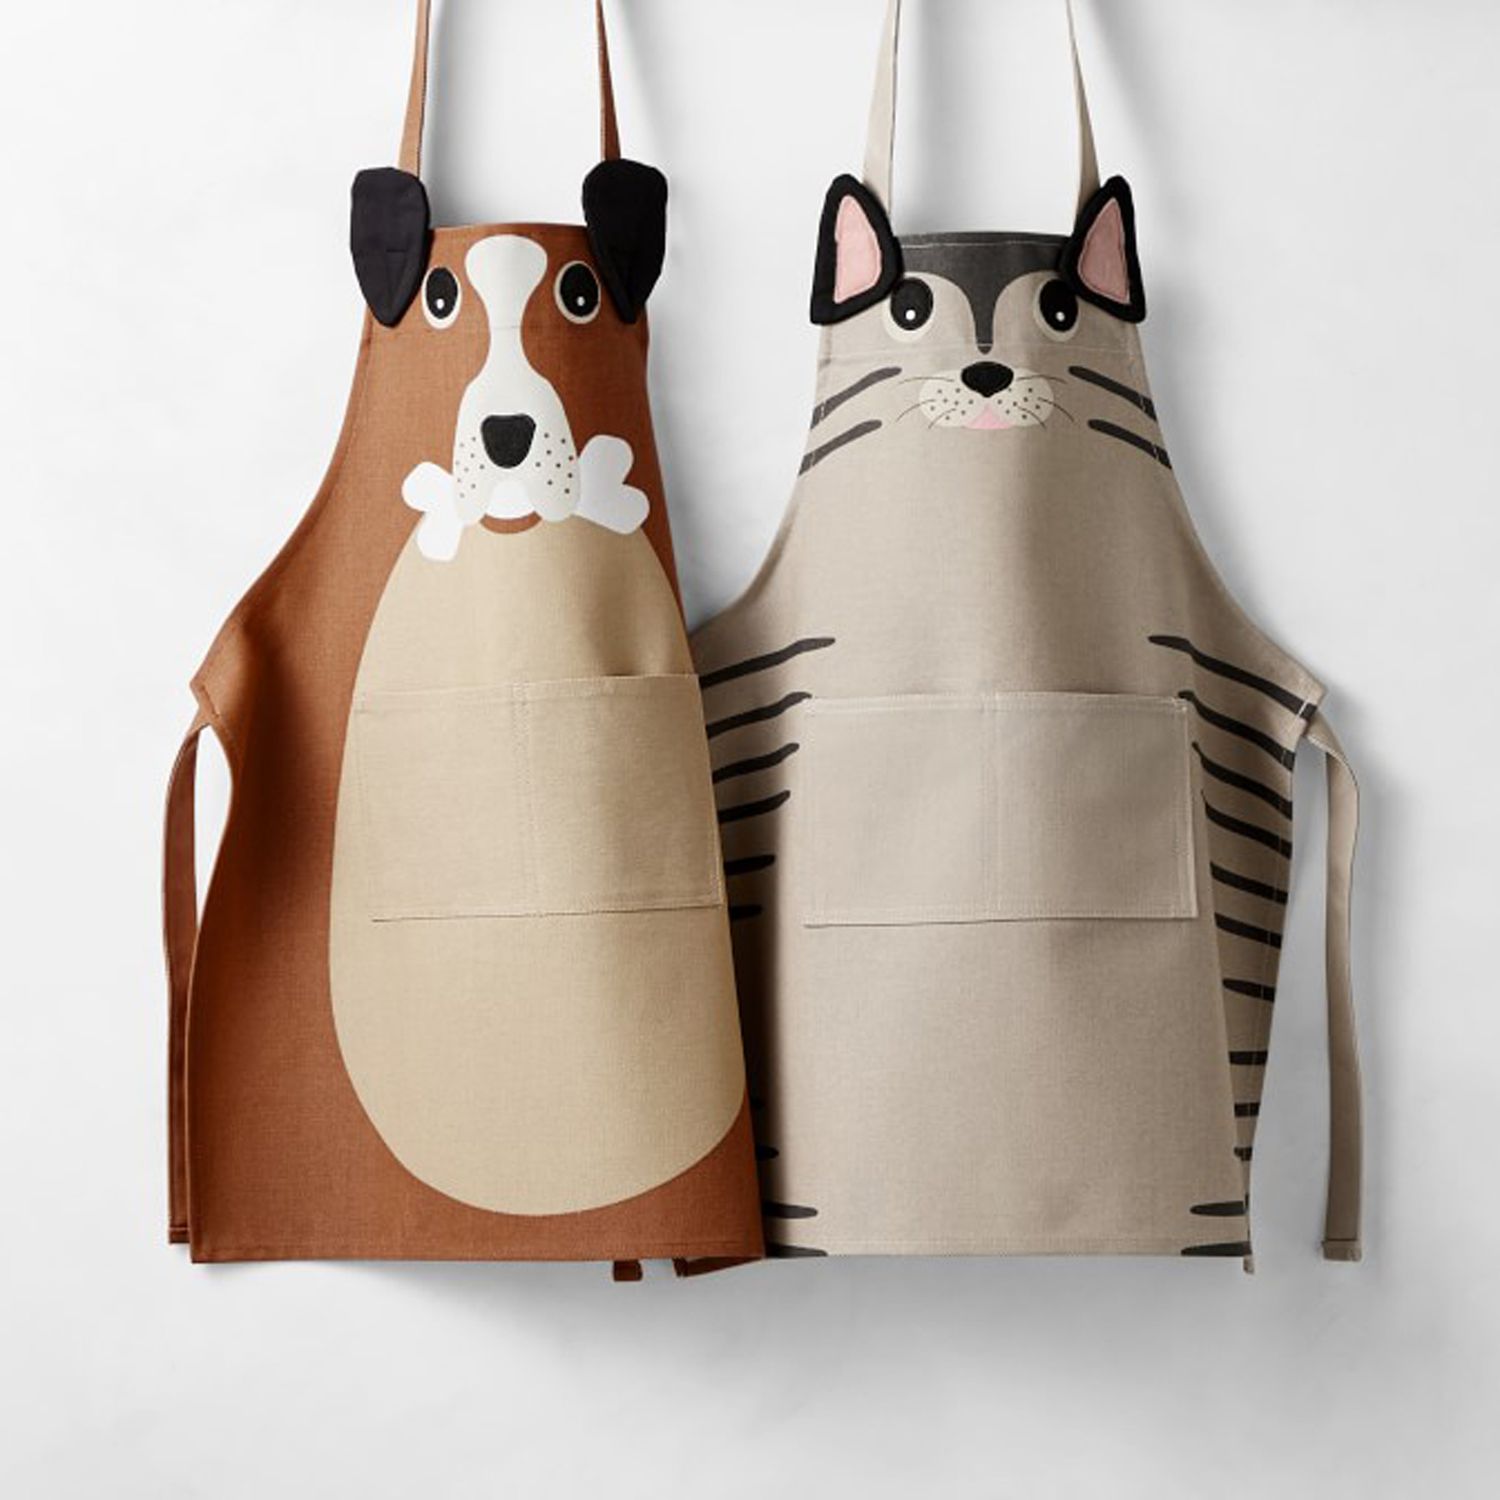 Cheap Christmas Gifts Under $25: dog and cat apron for kids